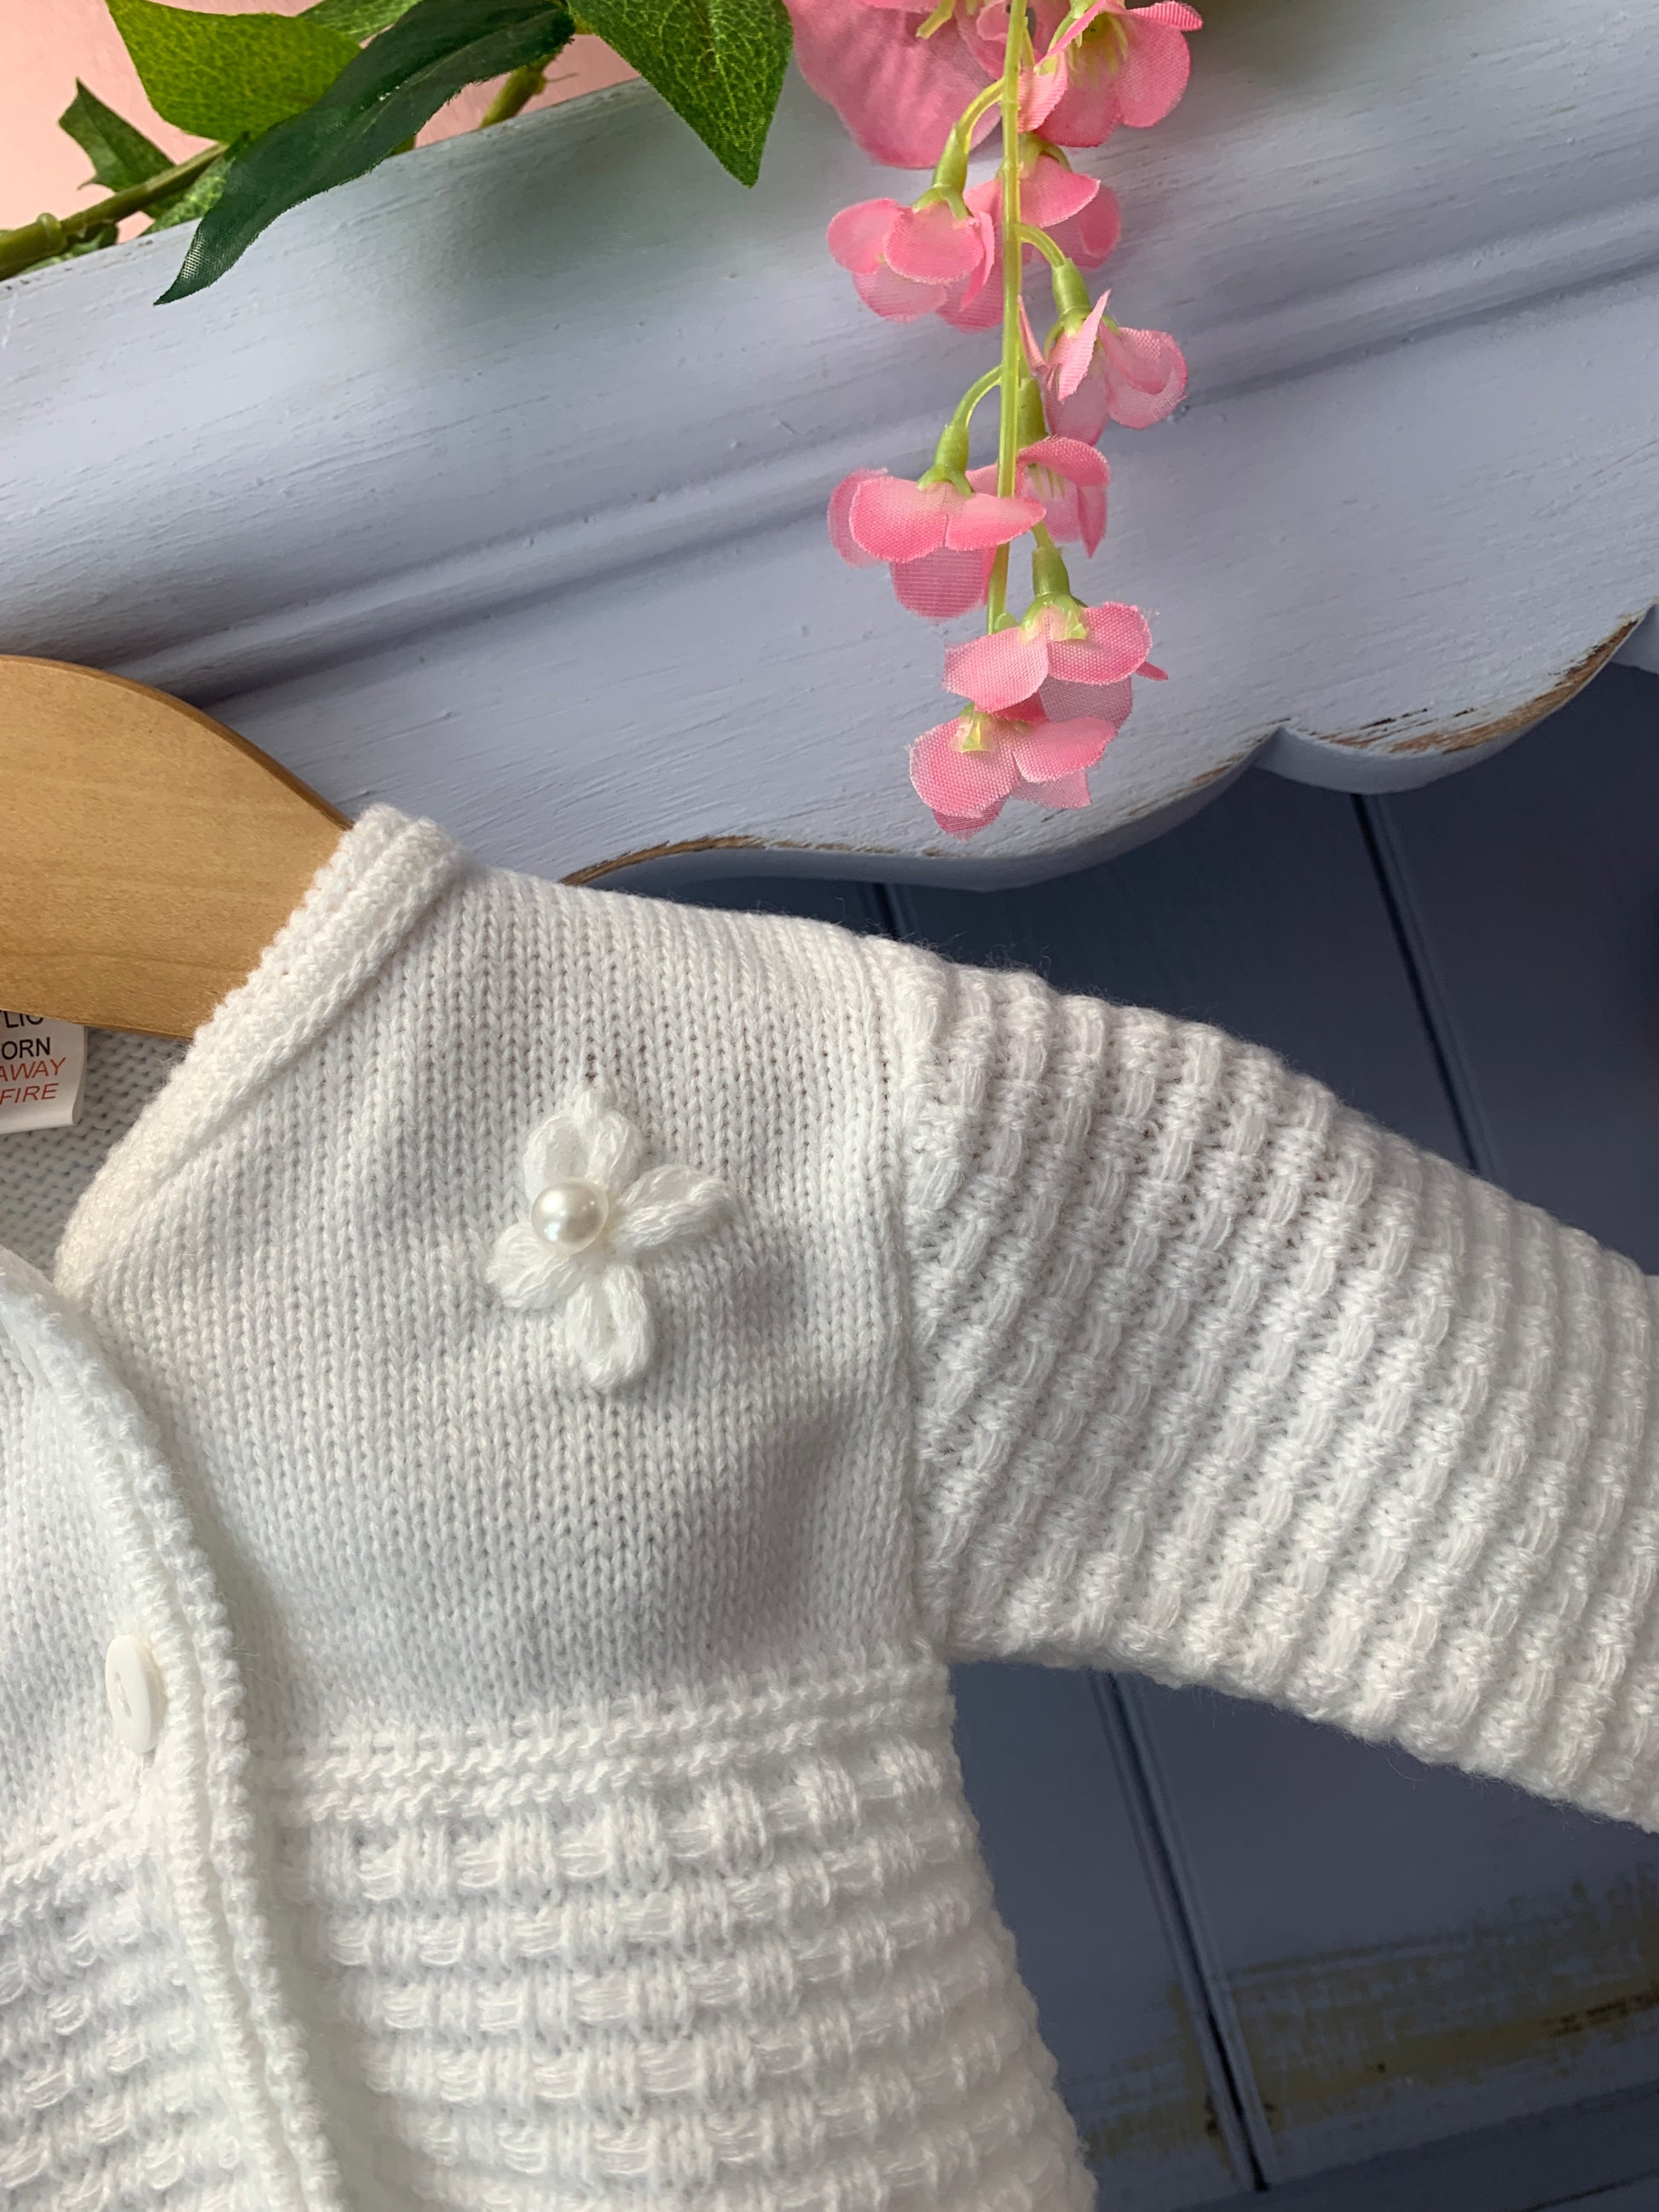 “Gabby” White Flower Pearl Cardigan - Hetty's Baby Boutique